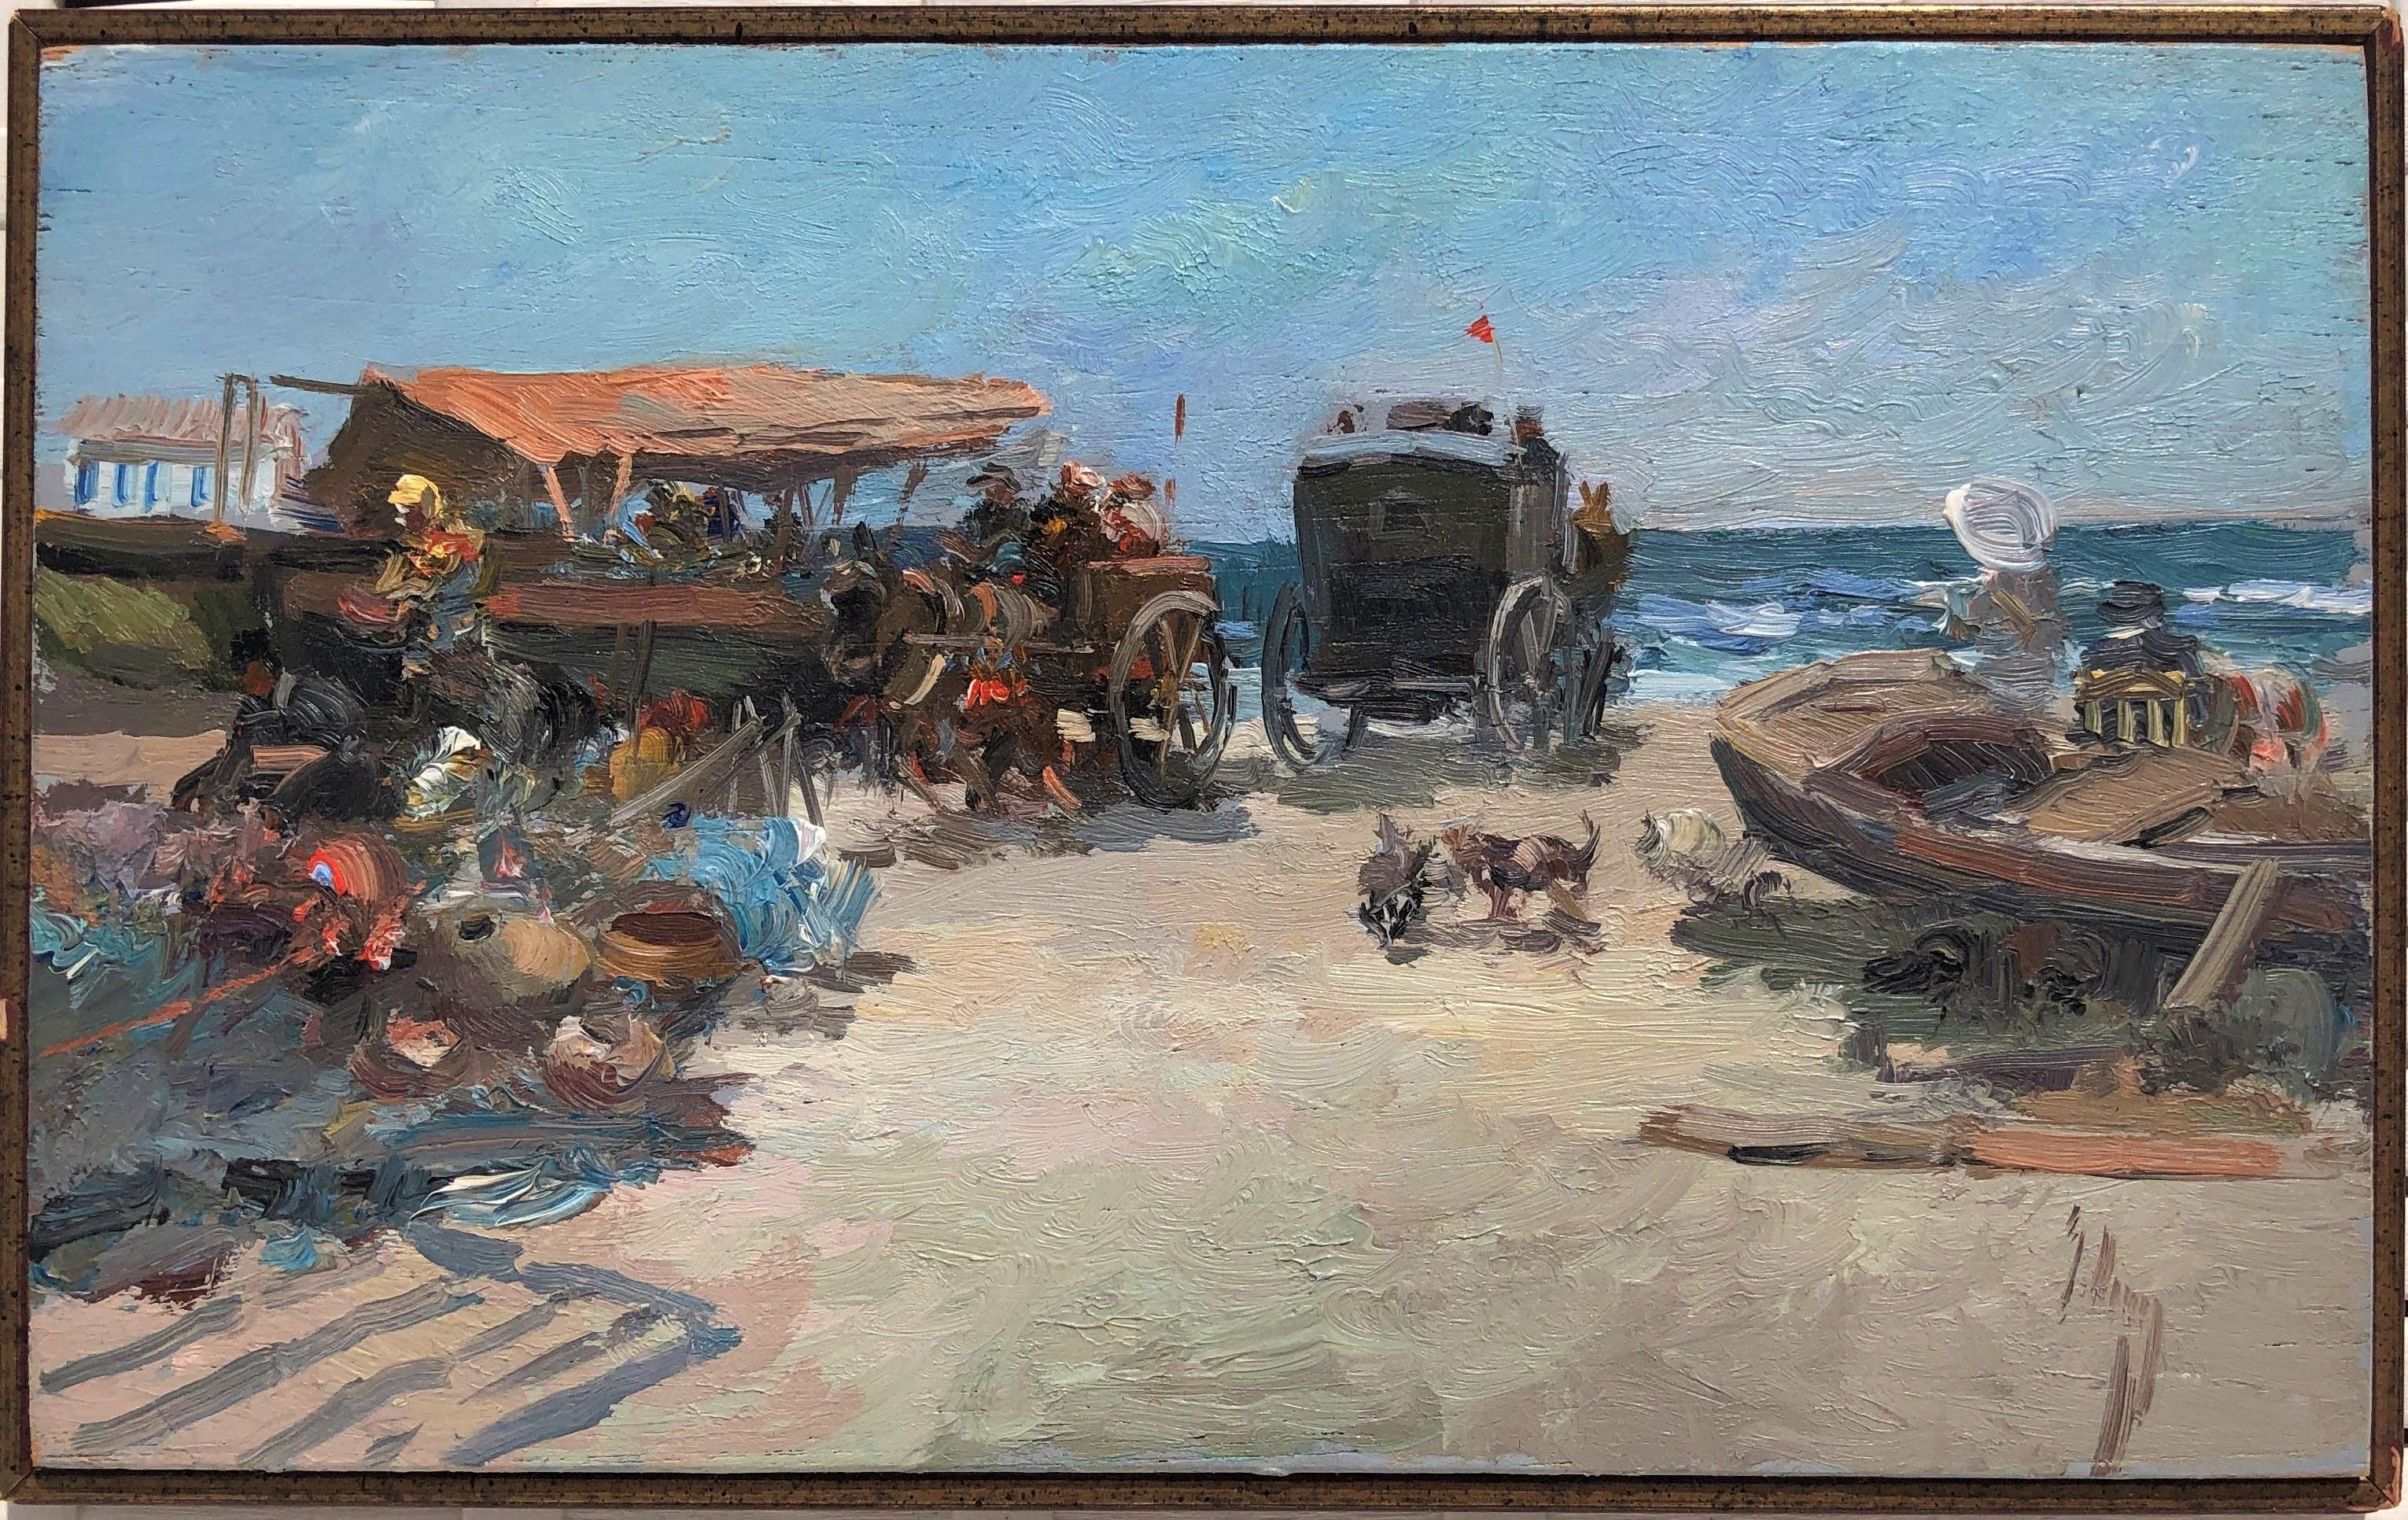 Valencia beach scene seascape original oil on board painting - Painting by José Luis Checa